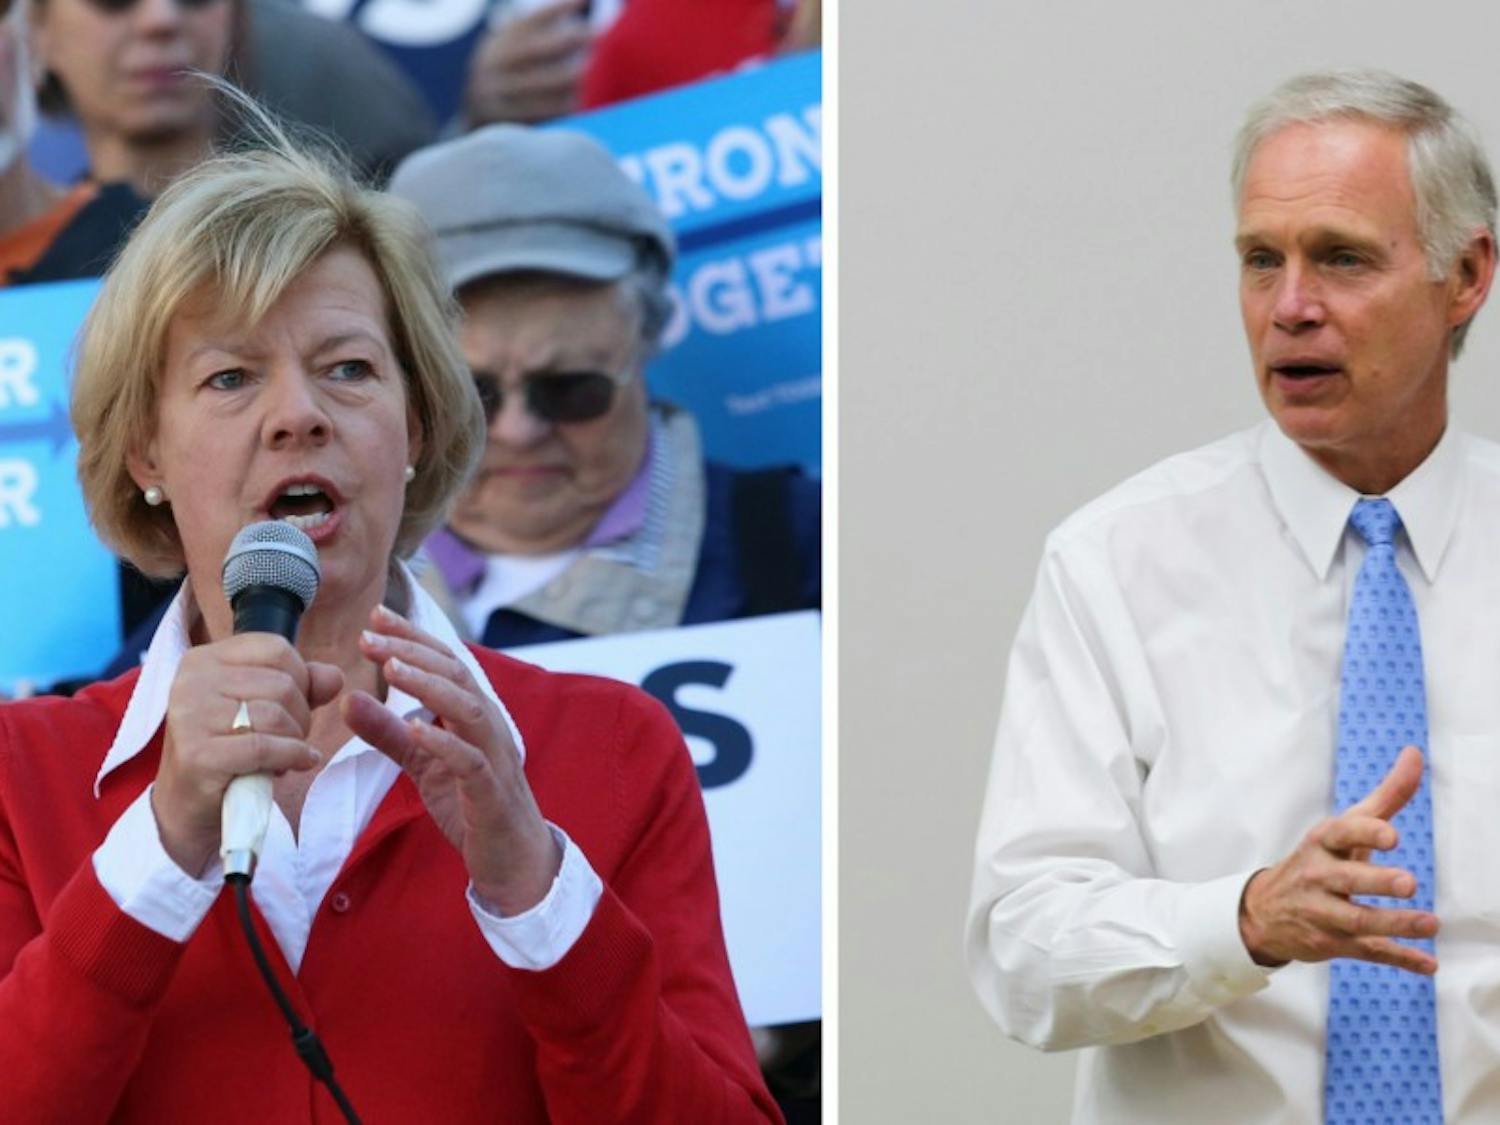 Republican Sen. Ron Johnson (right) has voted “yes” to all Trump’s appointees so far, Democratic Sen. Tammy Baldwin (left) has voted “no” on Rex Tillerson for Secretary of State and Mike Pompeo for CIA director.